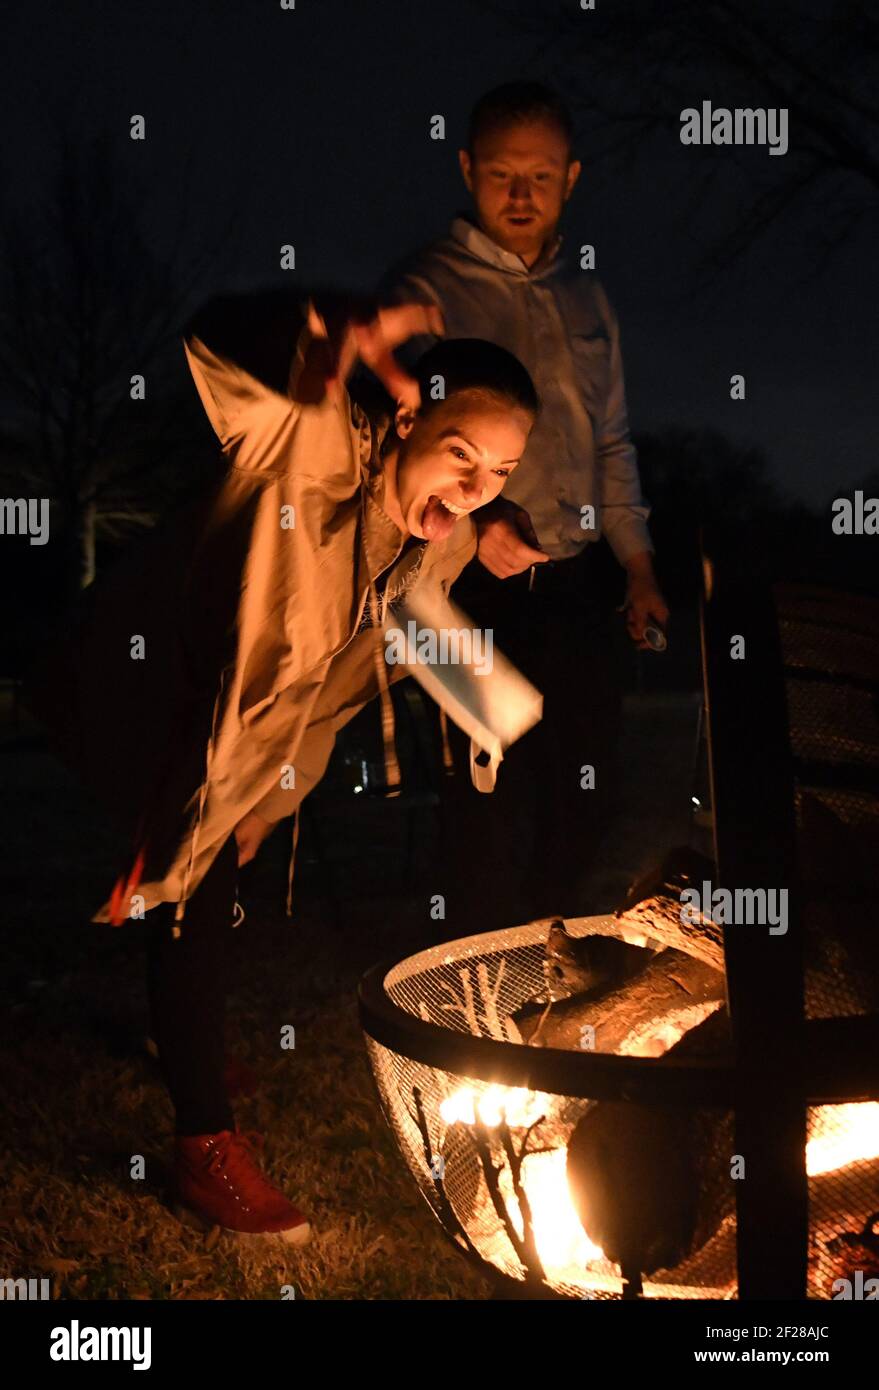 Dallas, United States. 10th Mar, 2021. Attendees at a 'Texas is Now Open' party throw their masks into a fire on Wednesday, March 10, 2021, in Parker, Texas. The event also included a moment of silence for those who have lost their lives to COVID-19. Texas governor Greg Abbott fully rescinded the statewide mask order and is allowing business to reopen at full capacity. Photo by Ian Halperin/UPI. Credit: UPI/Alamy Live News Stock Photo